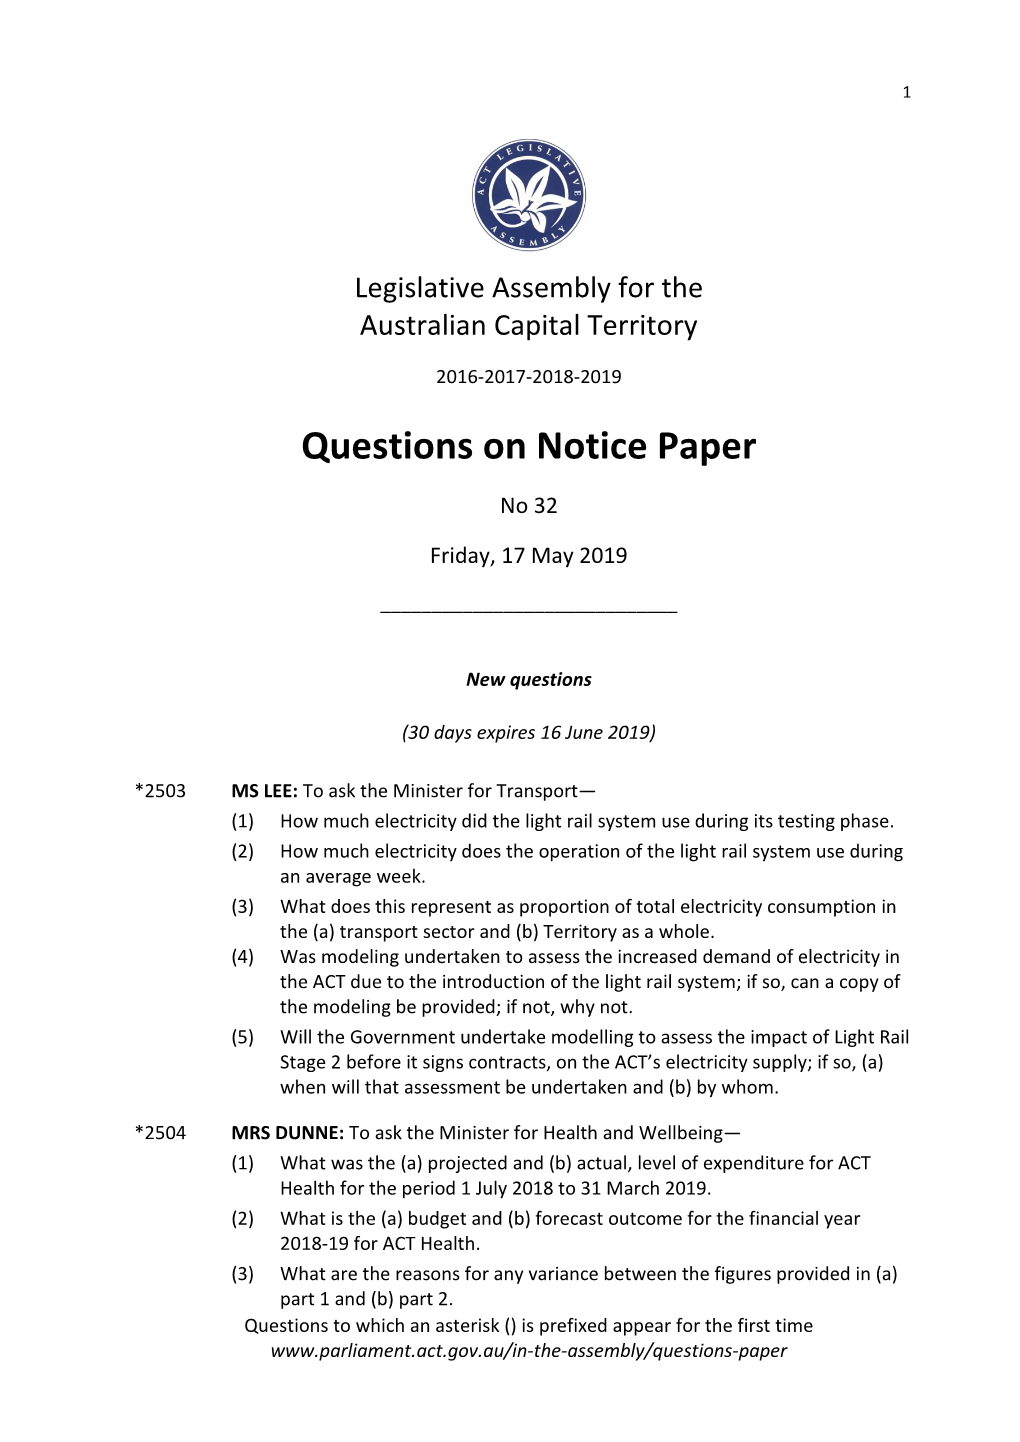 Questions on Notice Paper